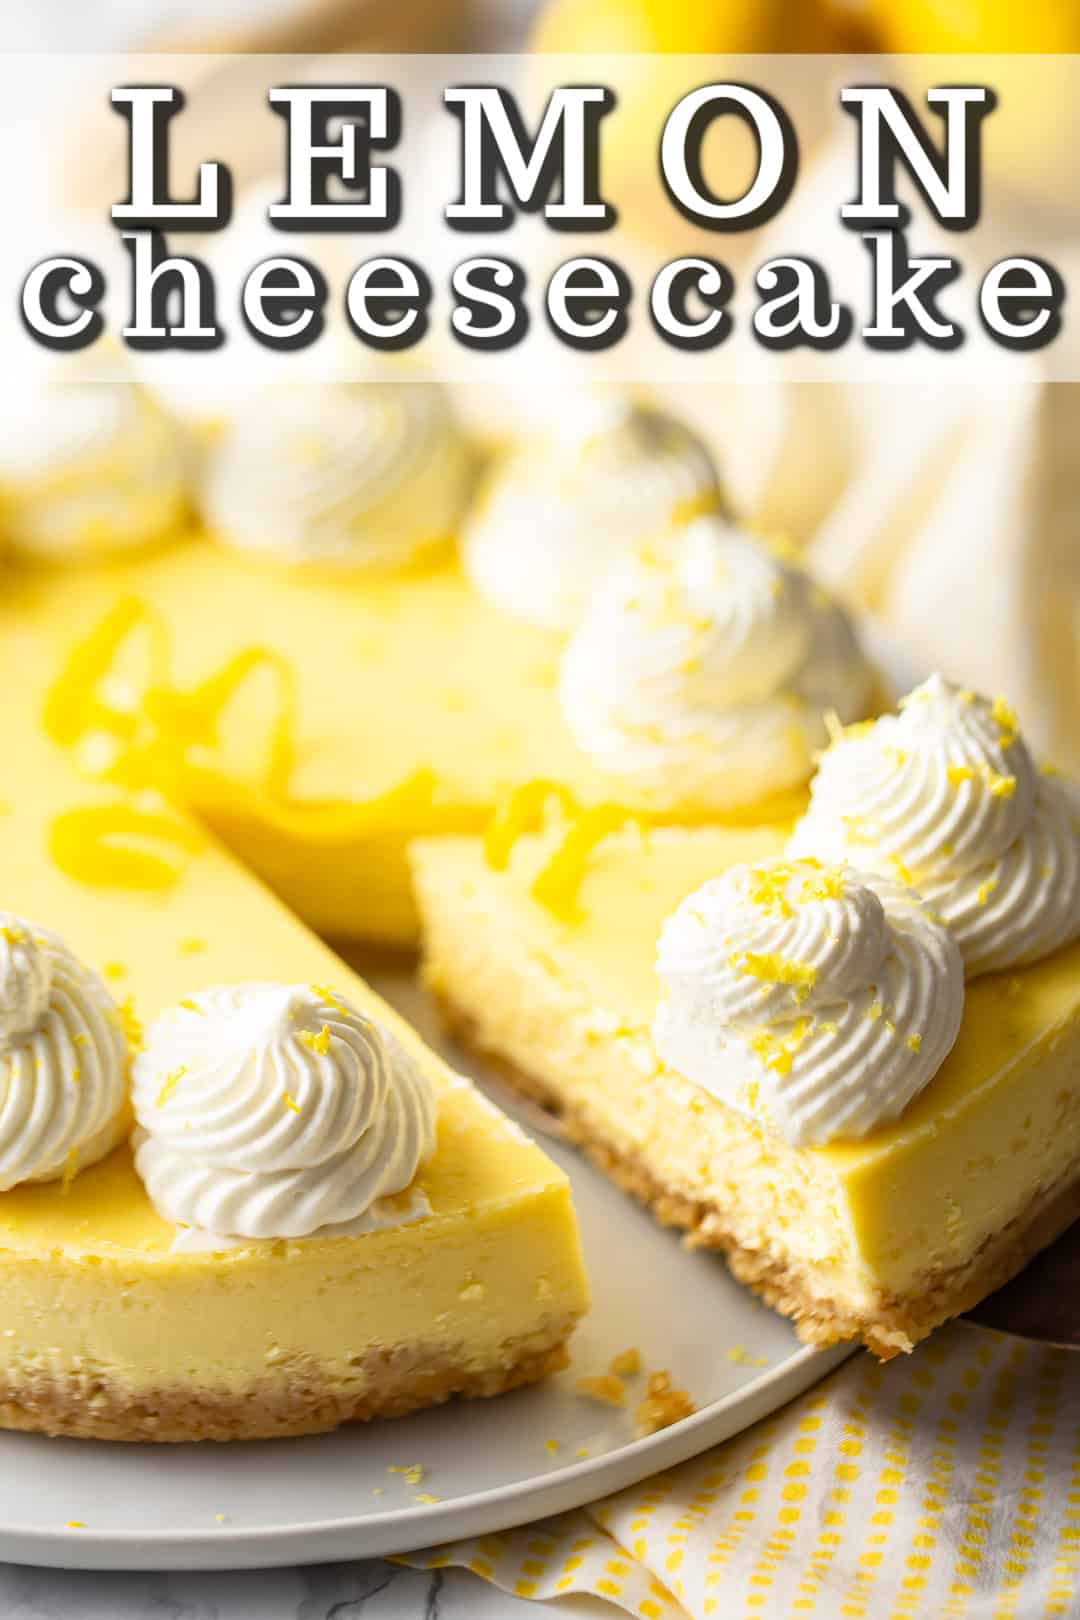 Lemon cheesecake recipe, baked and topped with whipped cream and citrus zest.